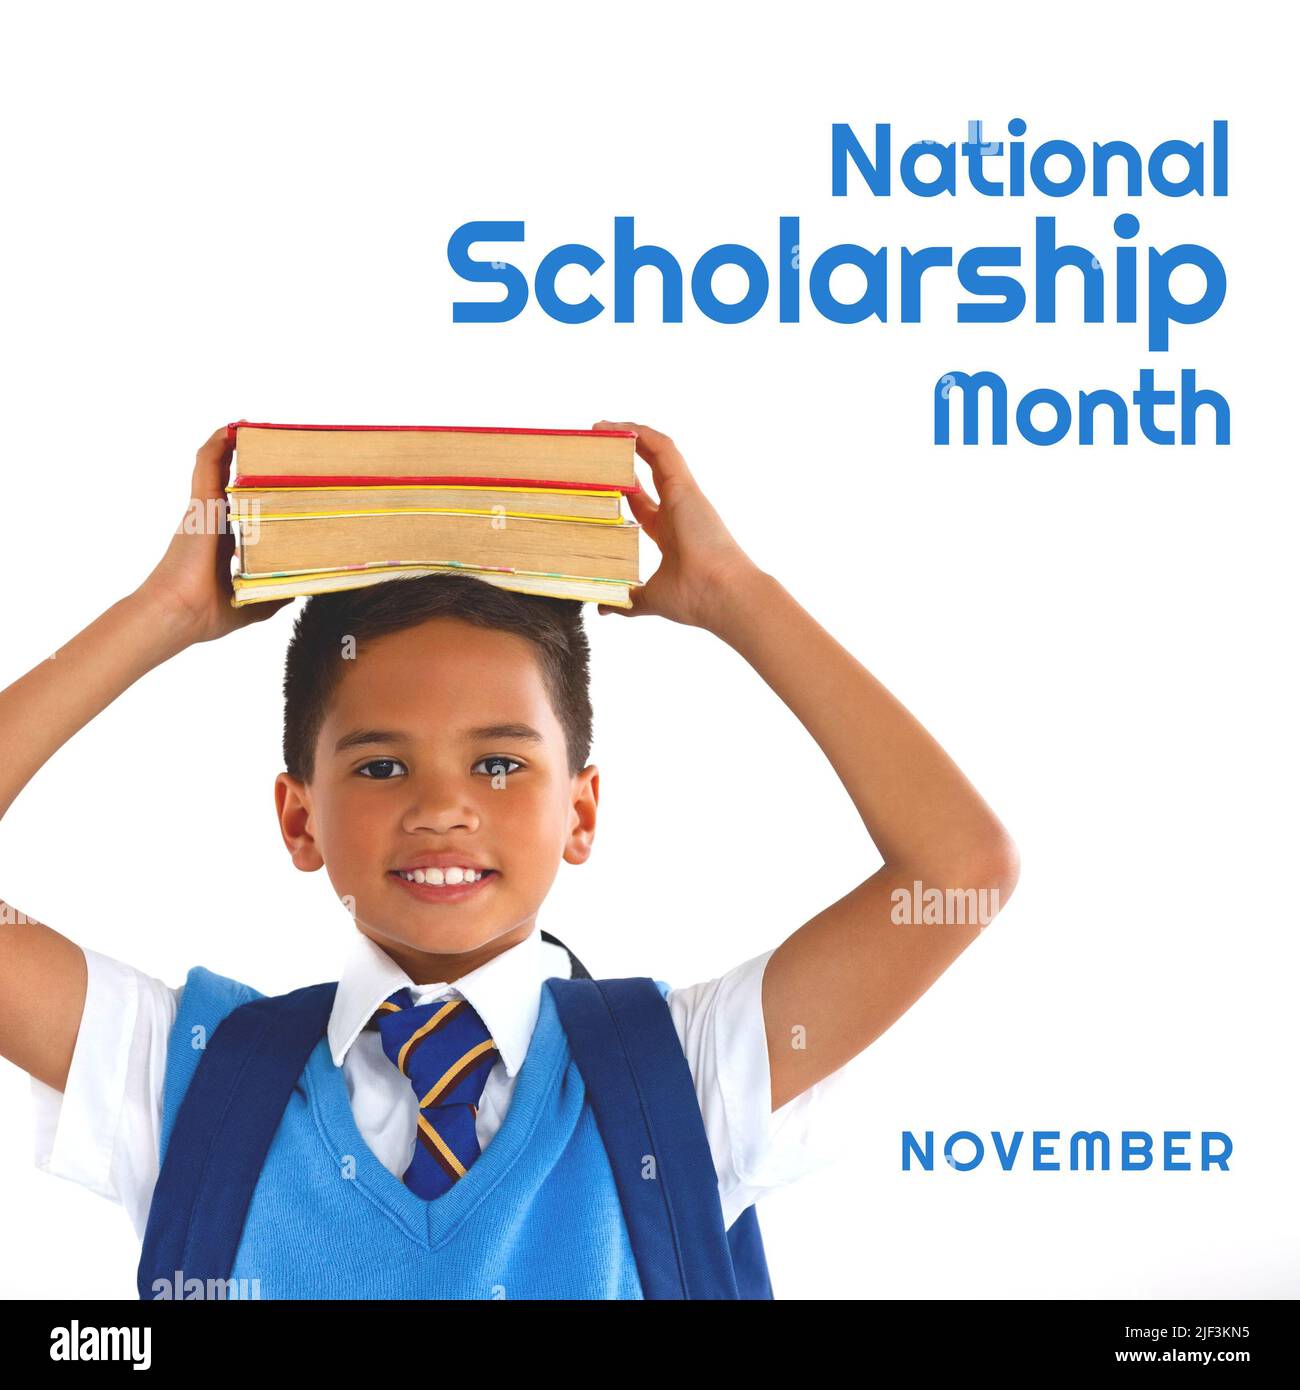 Composite of biracial boy carrying books on head and national scholarship month, november text Stock Photo